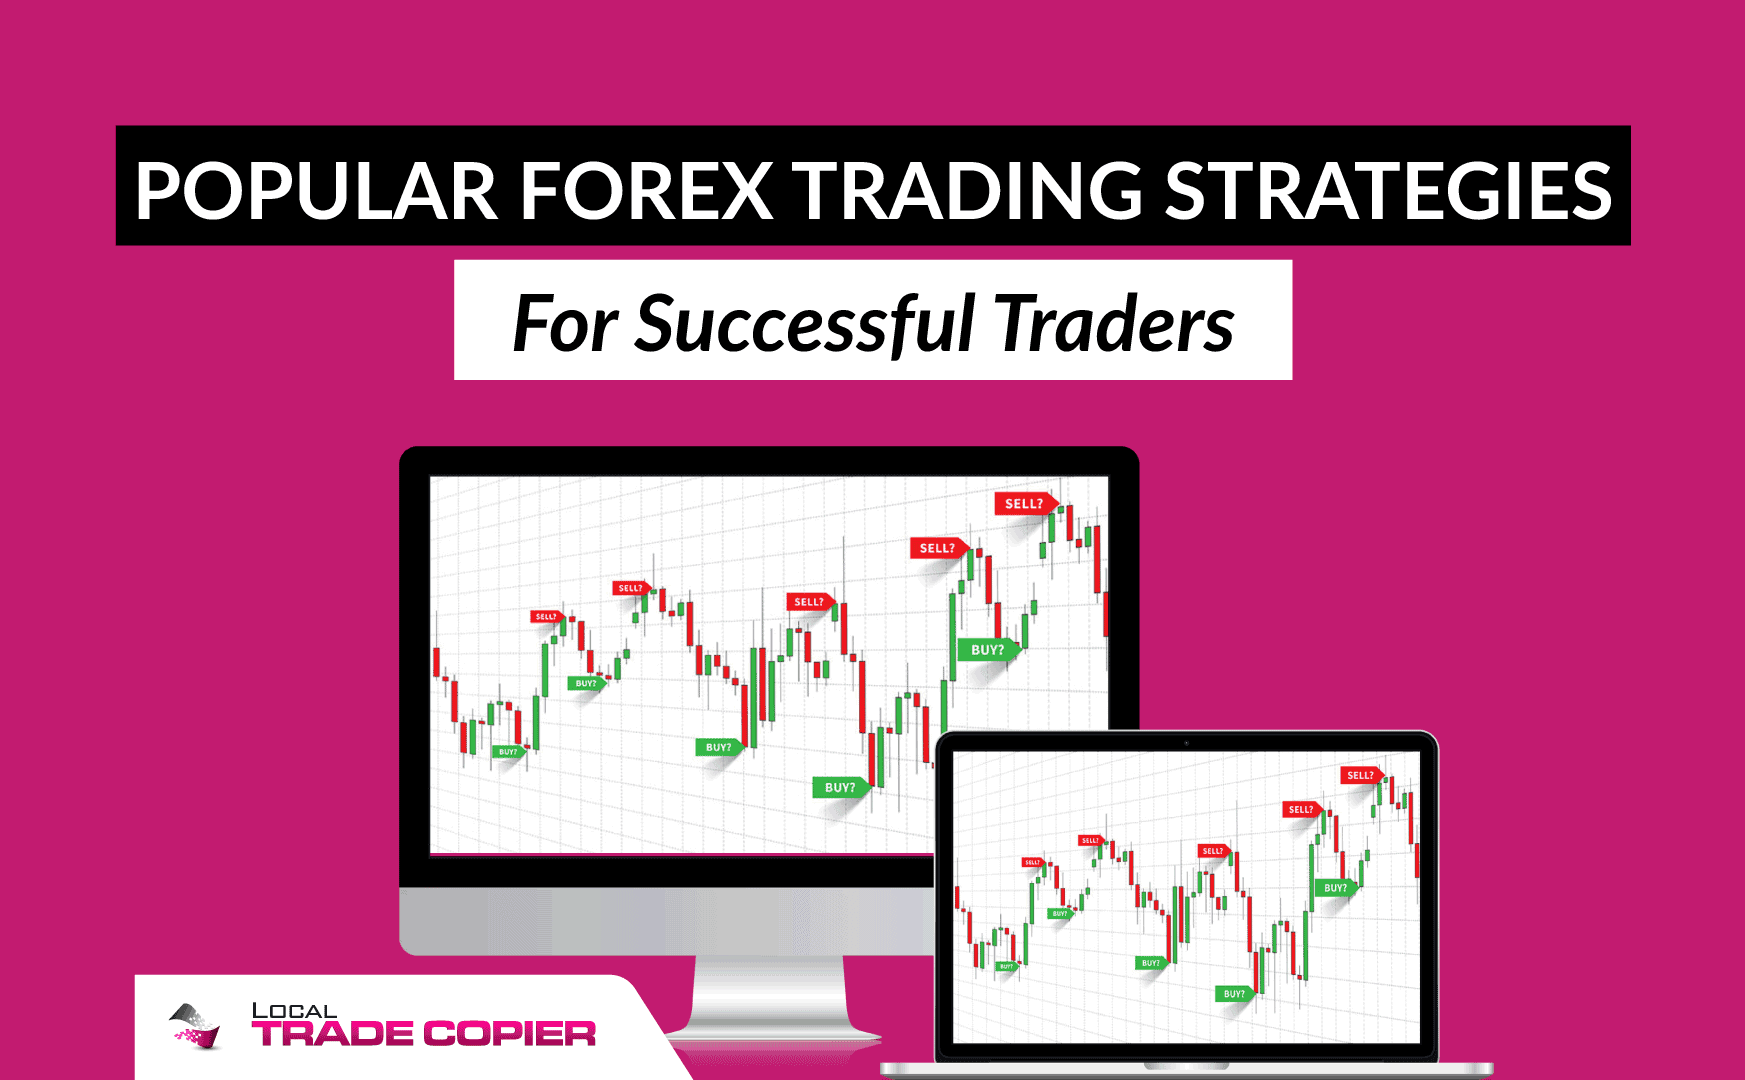 Strategies For Successful Traders For Forex Trading